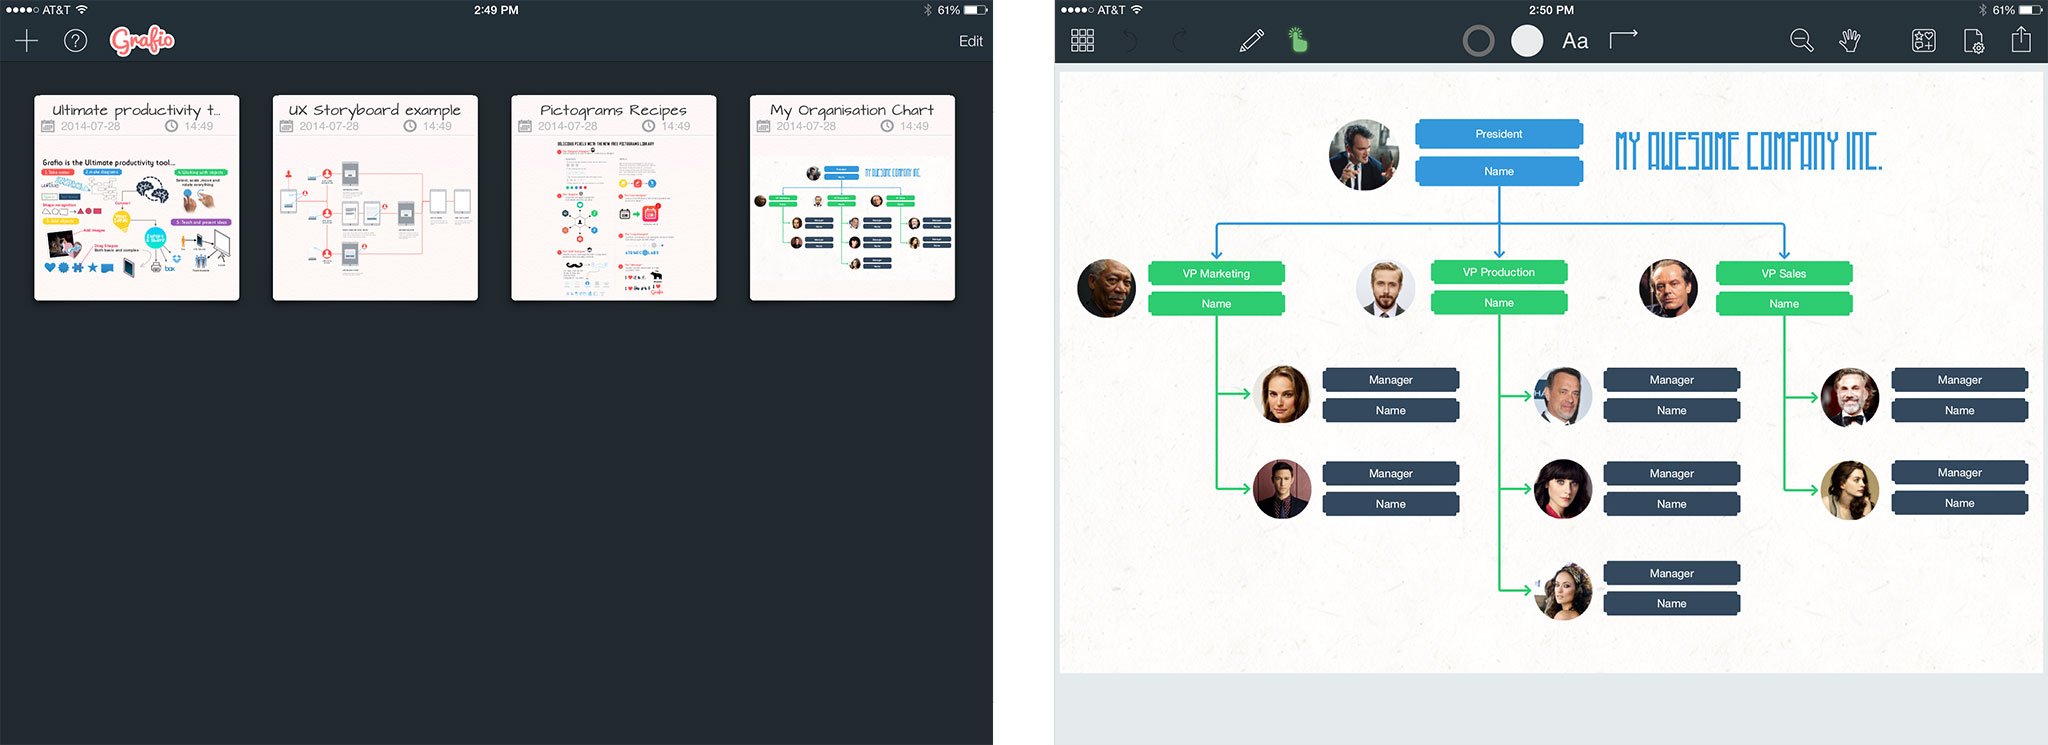 Best flowchart and diagram apps for iPad: Grafio